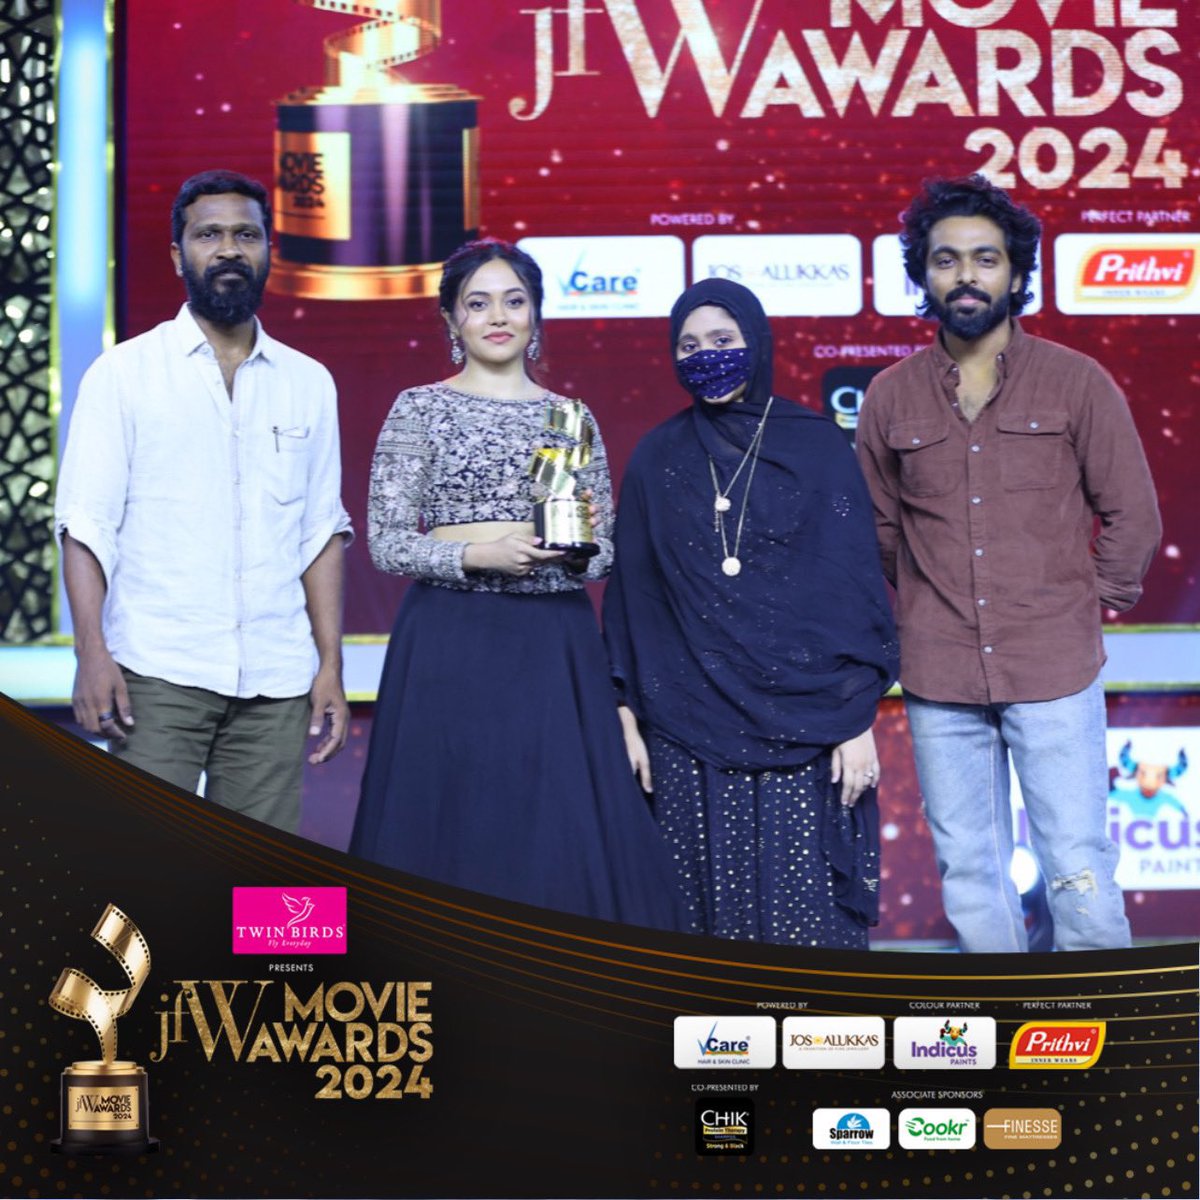 Thank you @jfwdigital for making this moment extremely special ! Felt very happy receiving my award from two people that I look up to the most my dear brother @gvprakash & #Vetrimaaran Sir and my ever inspiring , super talented sister who sees my success as her own…